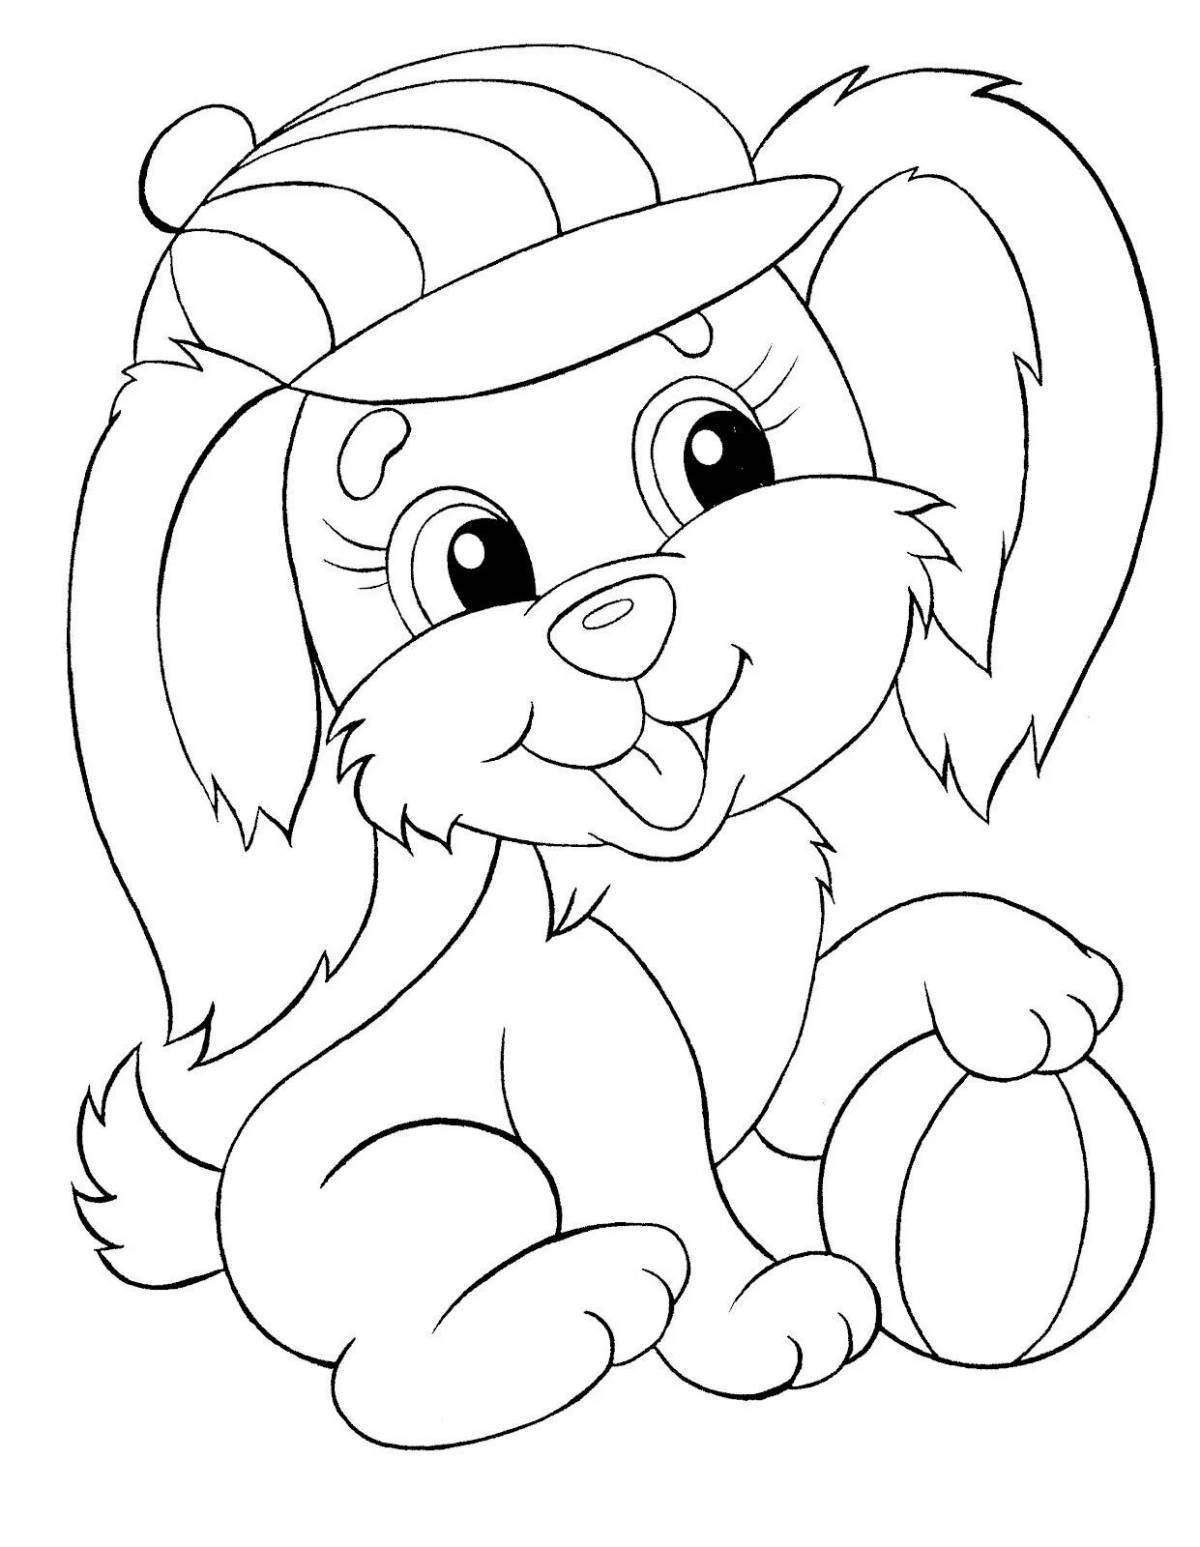 Animated coloring pages for children 5 years old